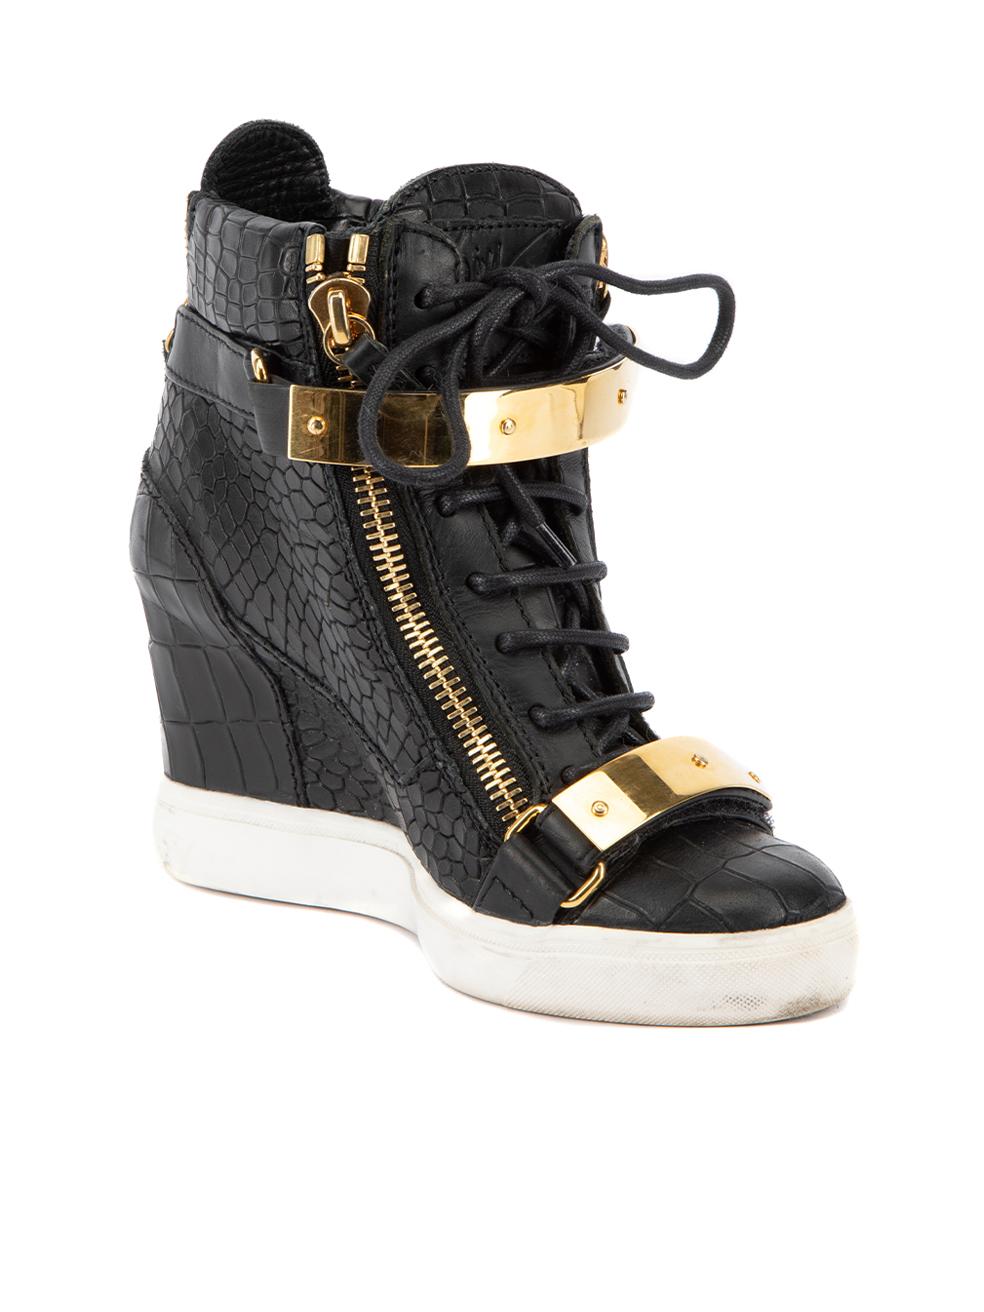 CONDITION is Very good.Hardly any visible wear to shoes is evident on this used Giuseppe Zanotti designer resale item.
 
 Details
  Black
 Leather
 High top trainers
 Crocodile embossed pattern
 Wedge heel
 Round toe
 Gold plate and zip accent
 Lace